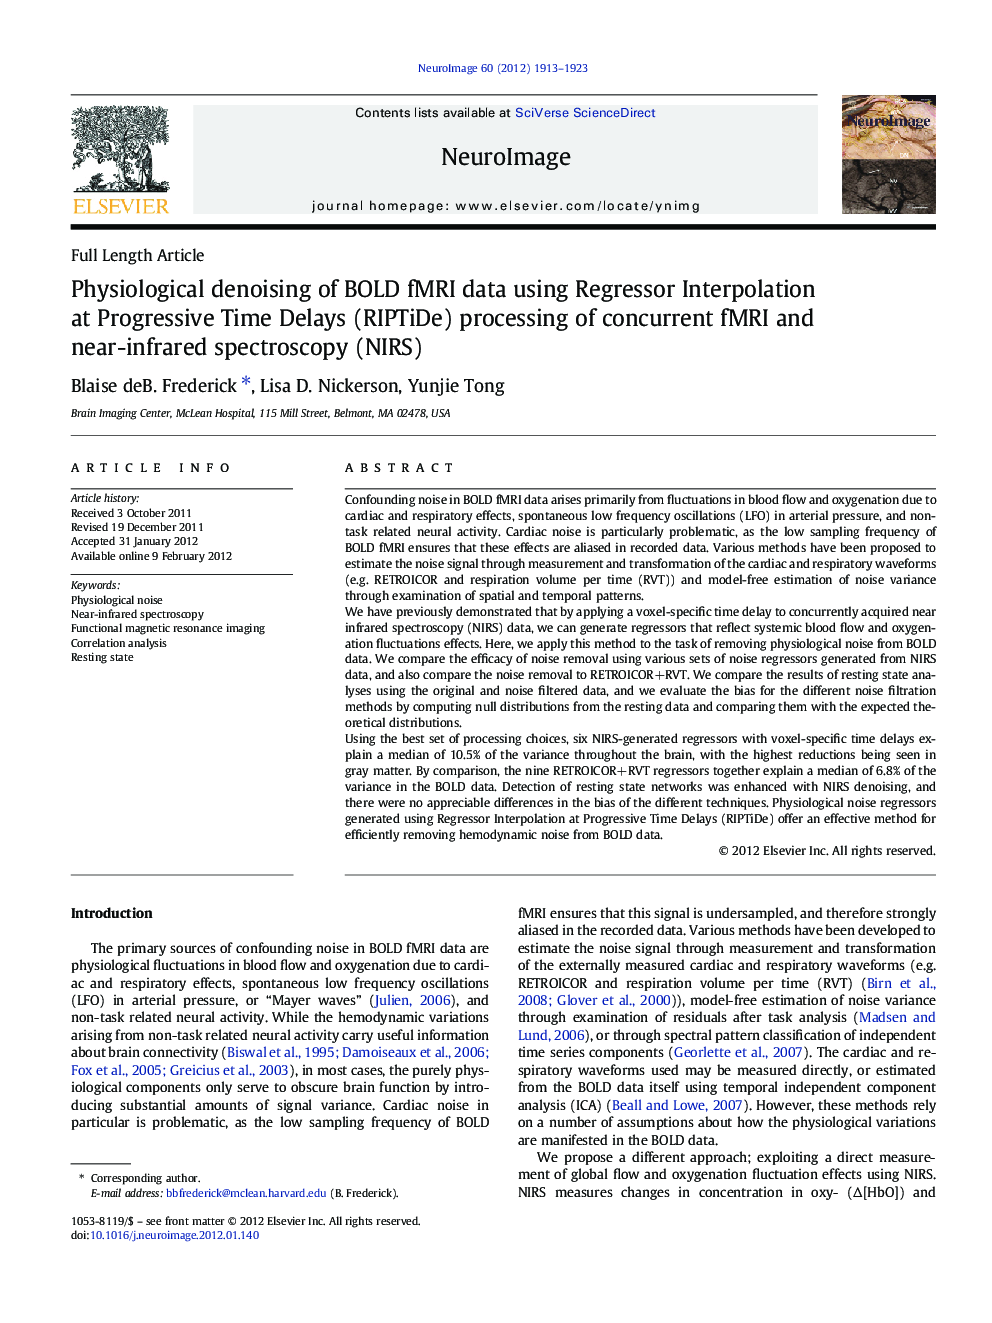 Full Length ArticlePhysiological denoising of BOLD fMRI data using Regressor Interpolation at Progressive Time Delays (RIPTiDe) processing of concurrent fMRI and near-infrared spectroscopy (NIRS)